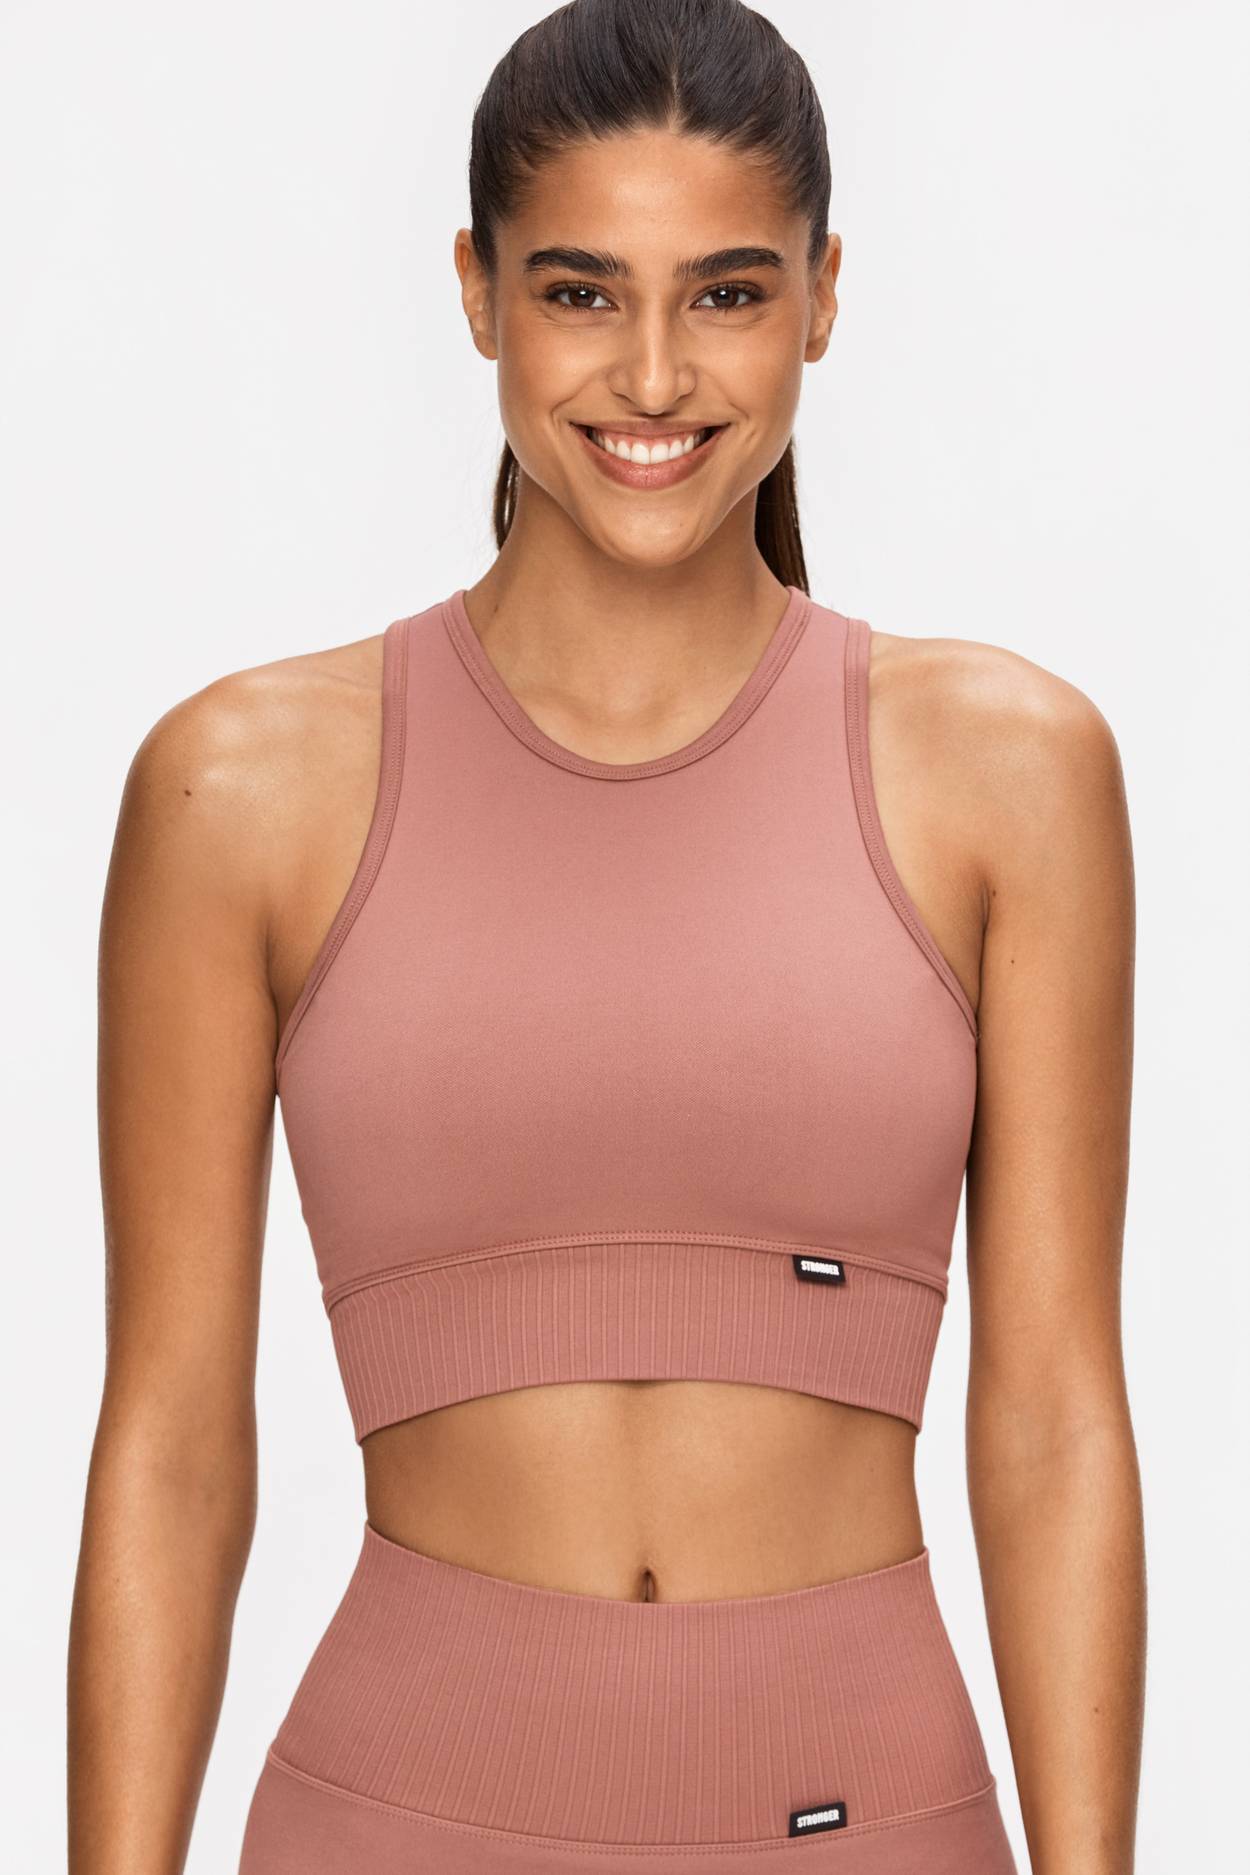 perfect resize crop top